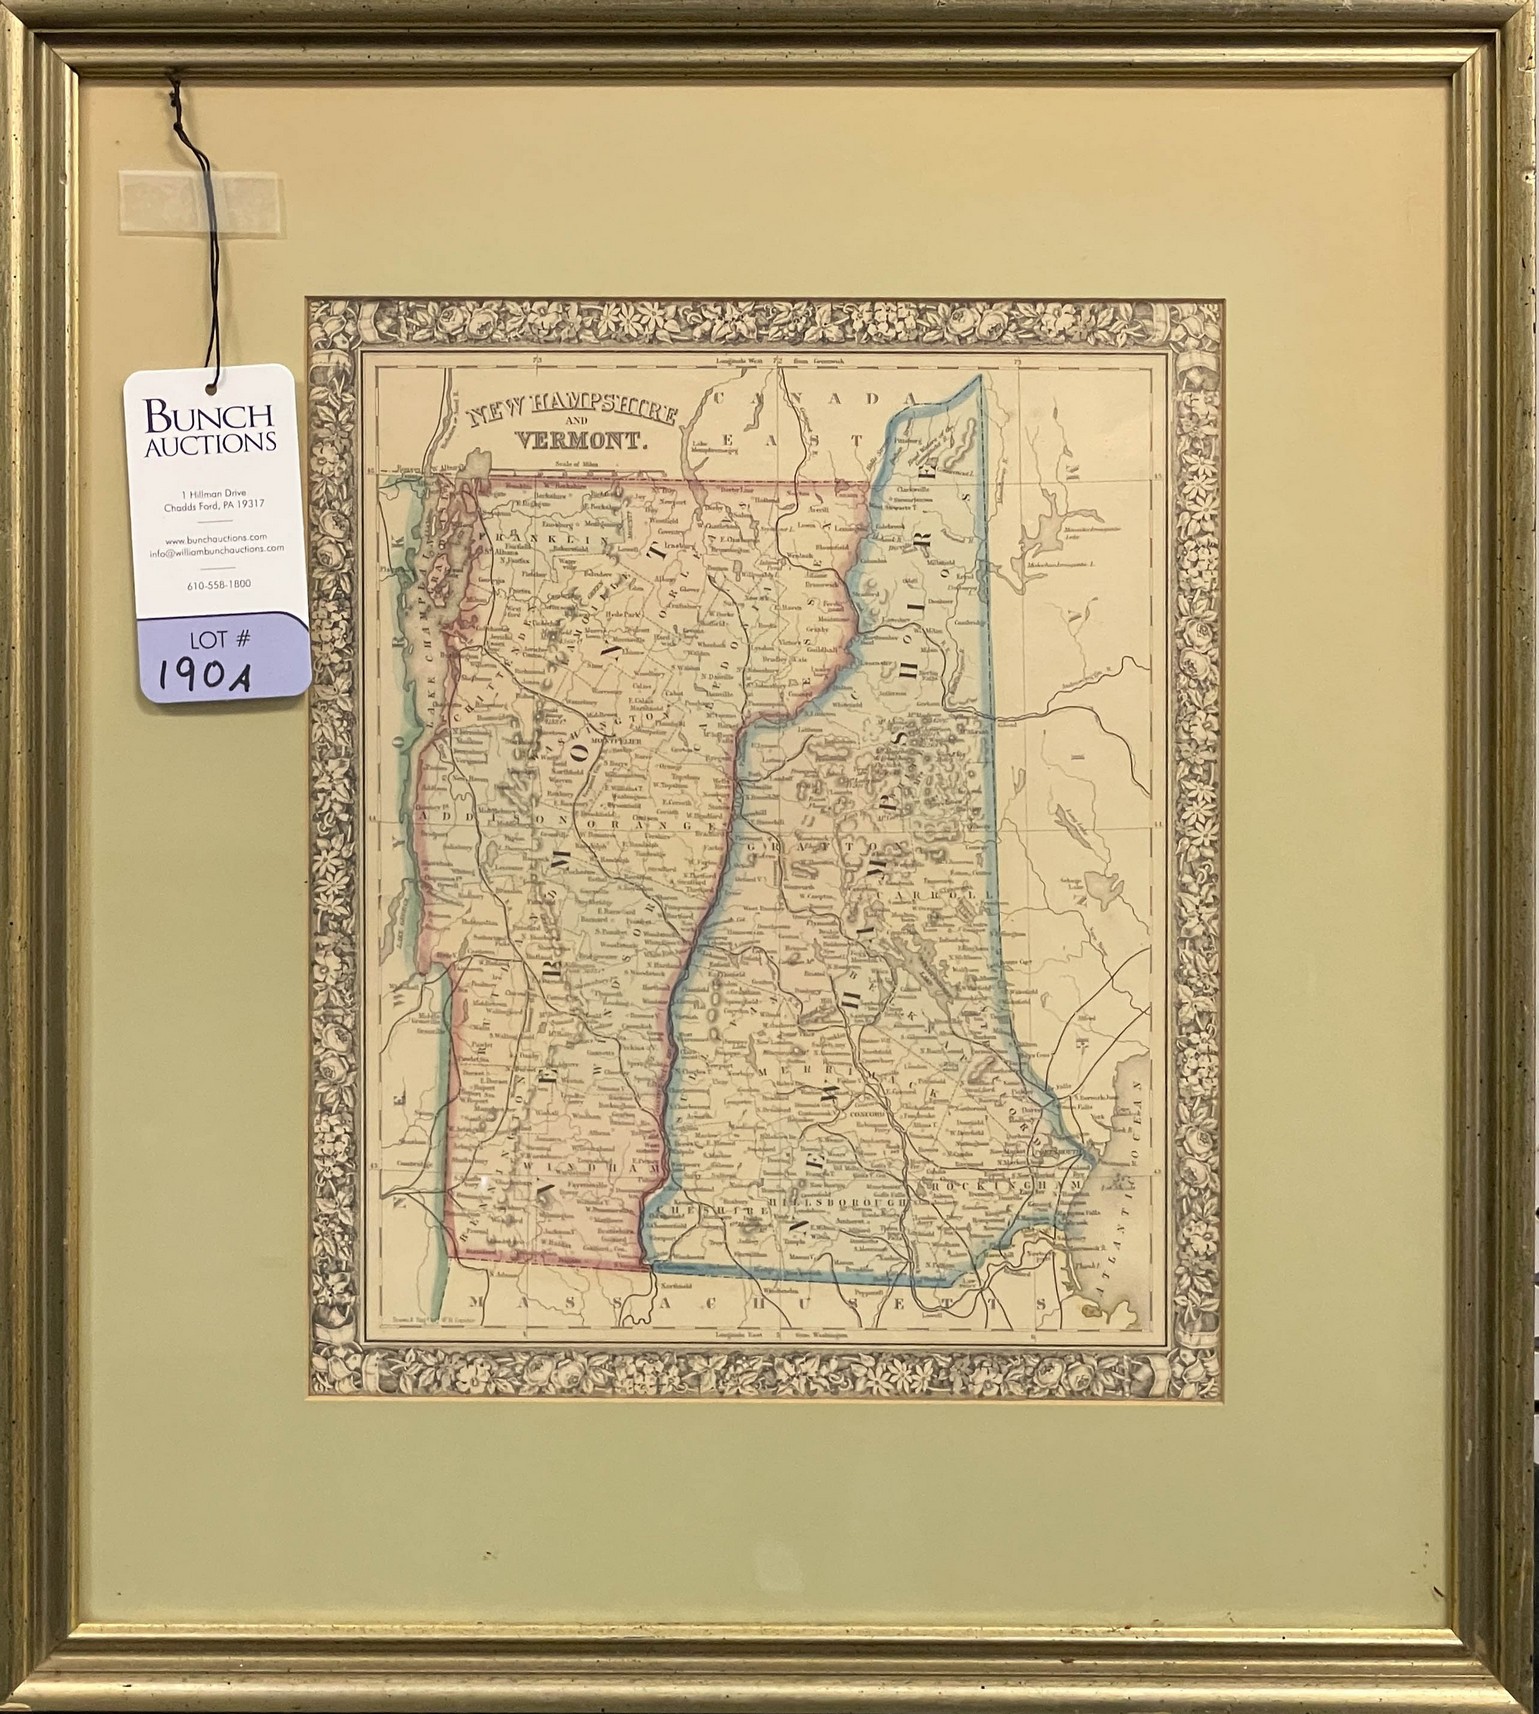 A hand colored framed map of Vermont